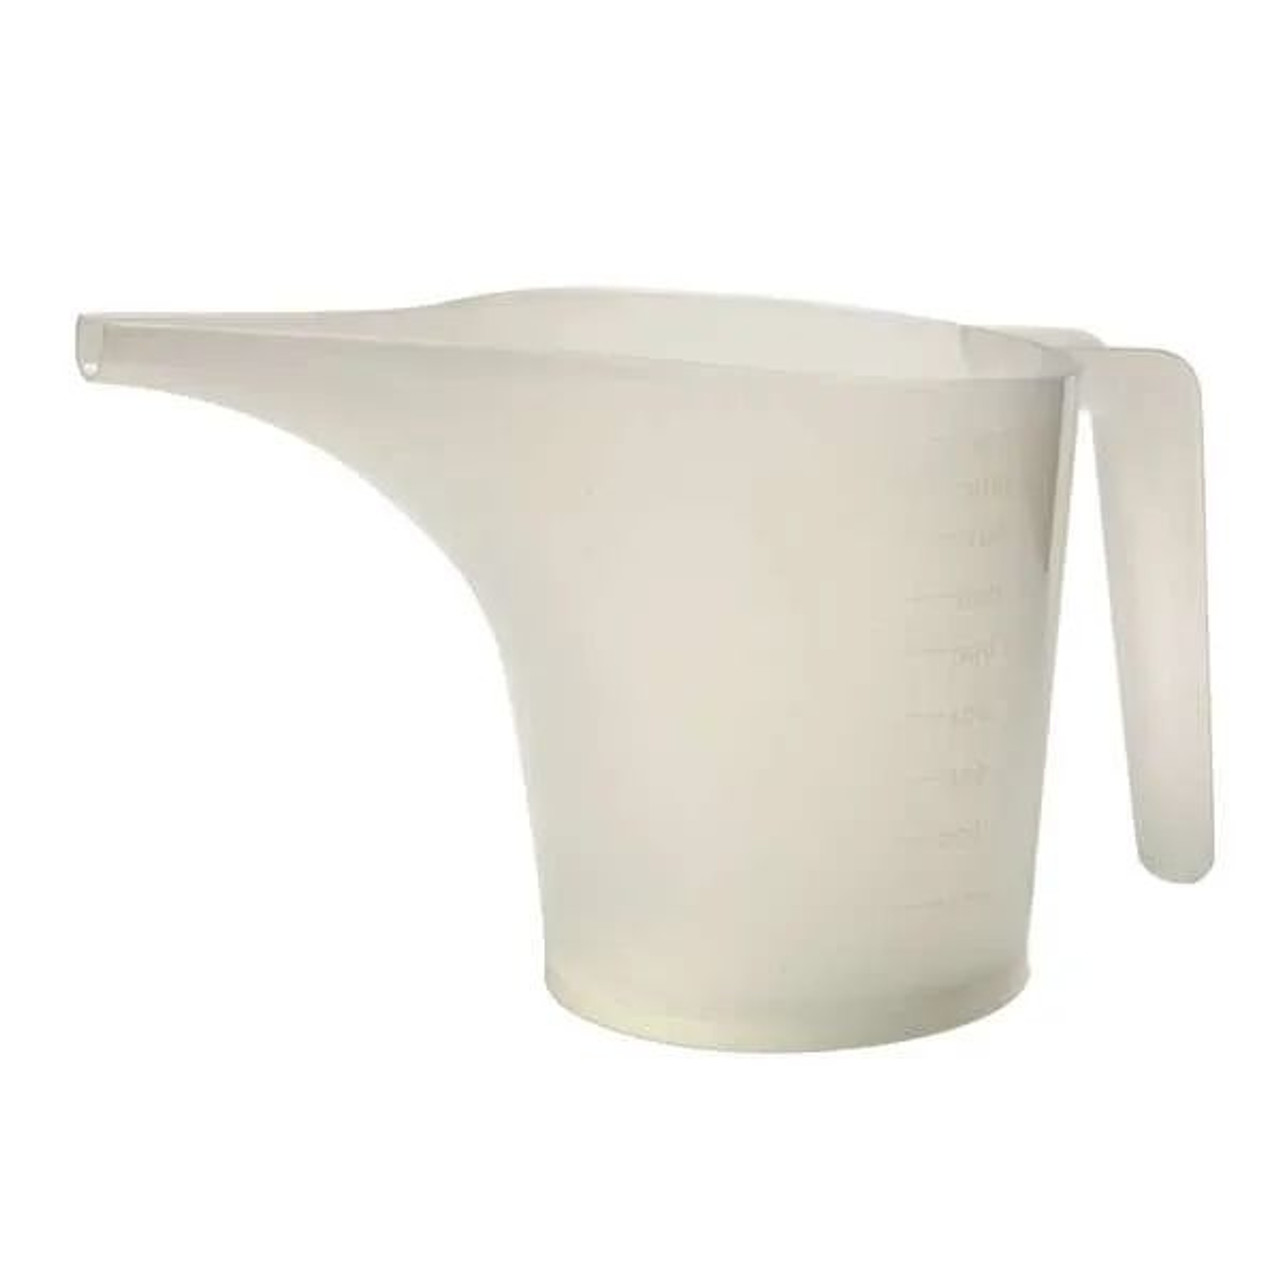 OXO GoodGrips Angled Liquid Measuring Cup, 2 Cup - Fante's Kitchen Shop -  Since 1906